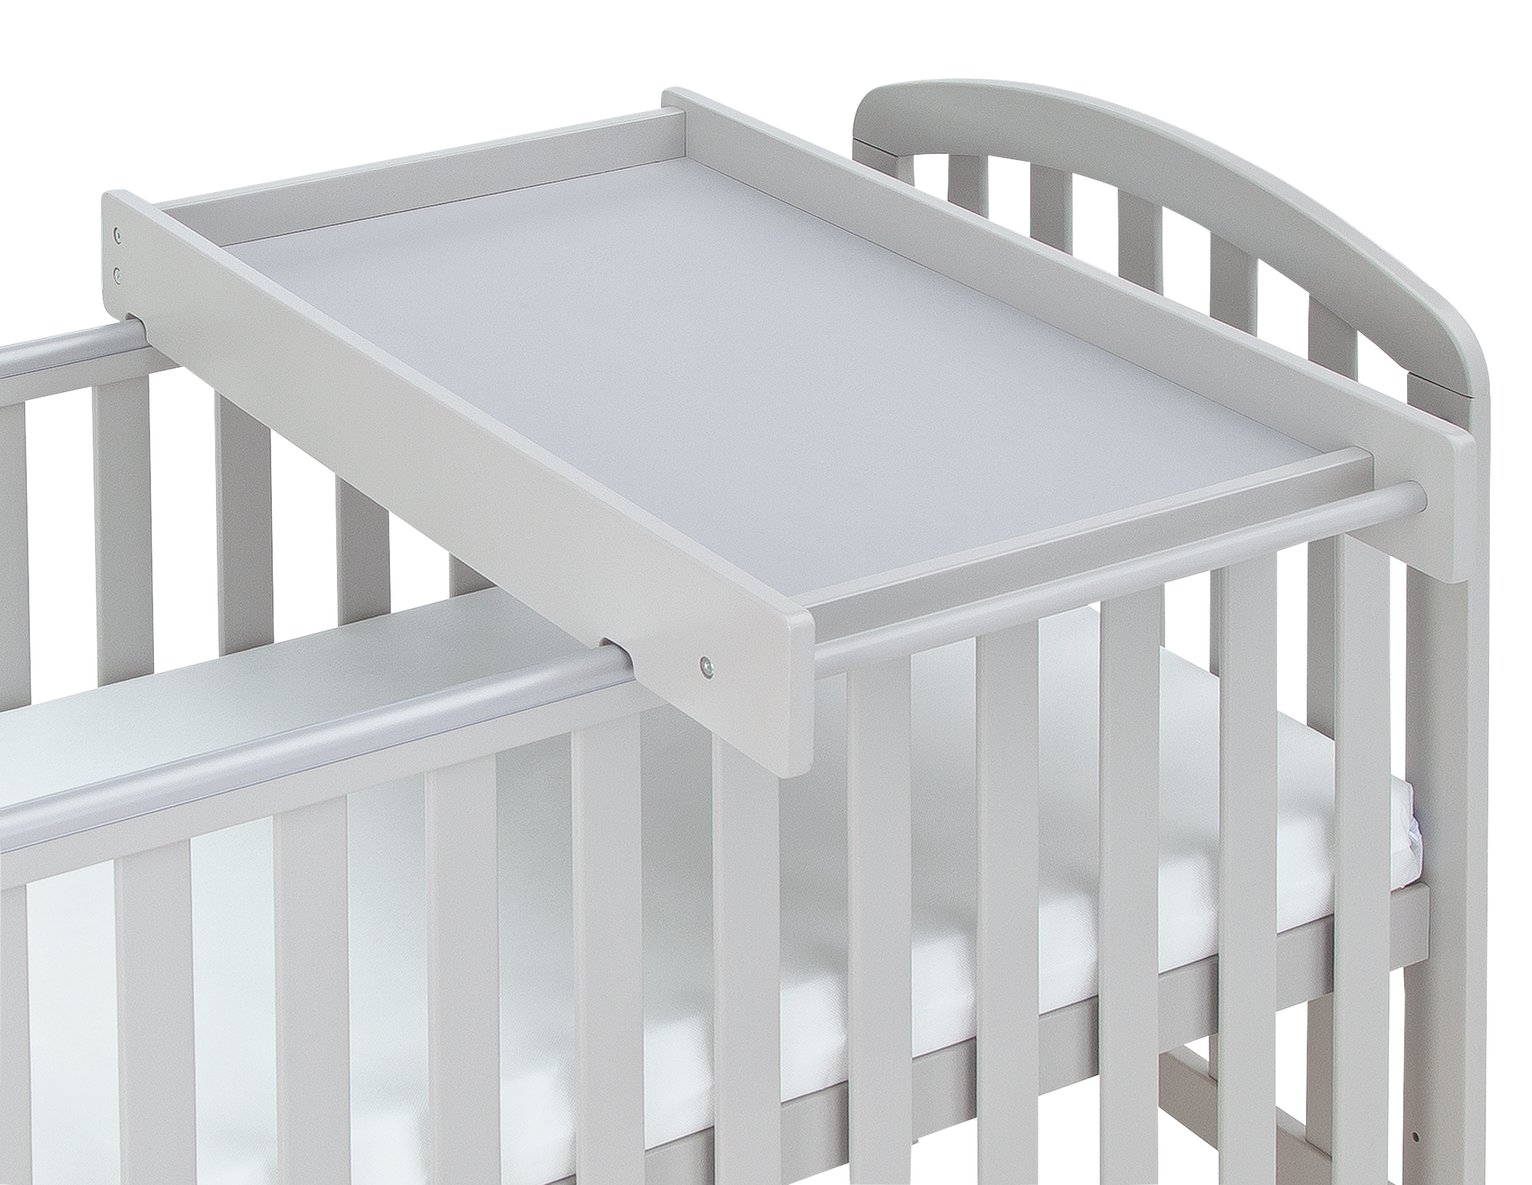 grey cot and change table